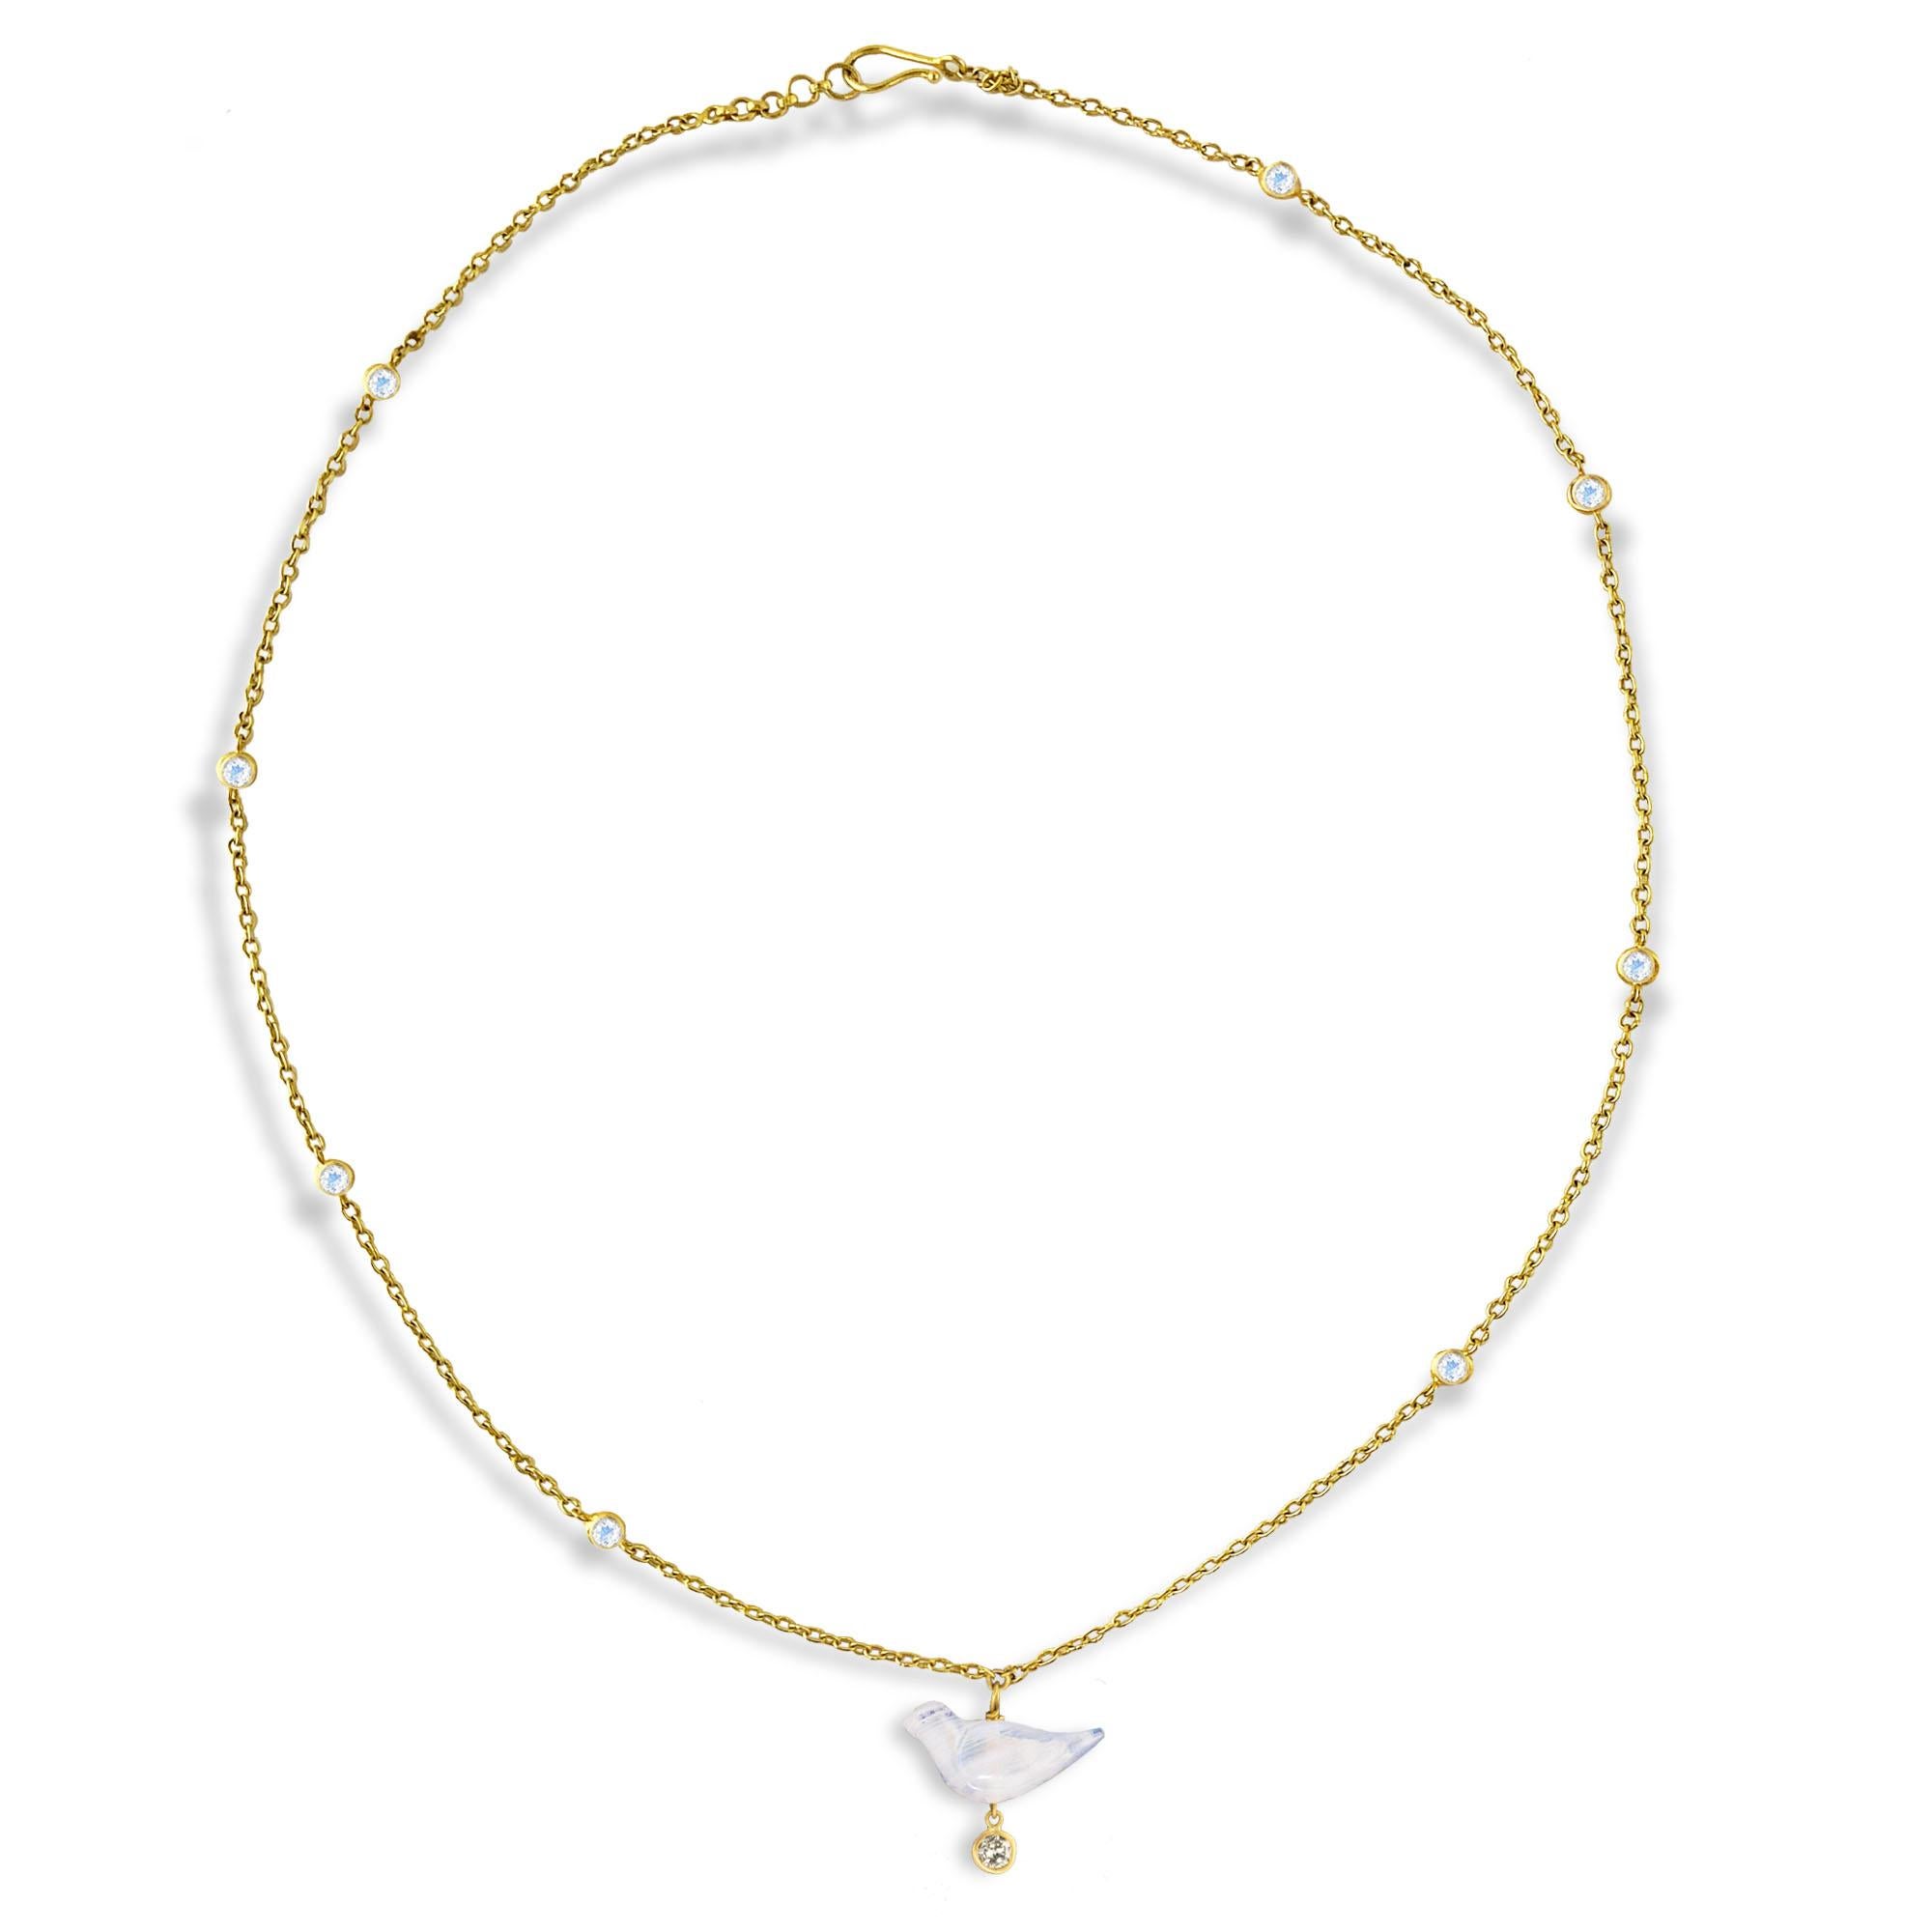 Hand-carved Rainbow Moonstone bird with a diamond drop (.13 carats) is featured on a chain with rainbow moonstone accents. The necklace is finished with a hook closure. Wear this piece alone or layered with other favorite necklaces.  This piece is